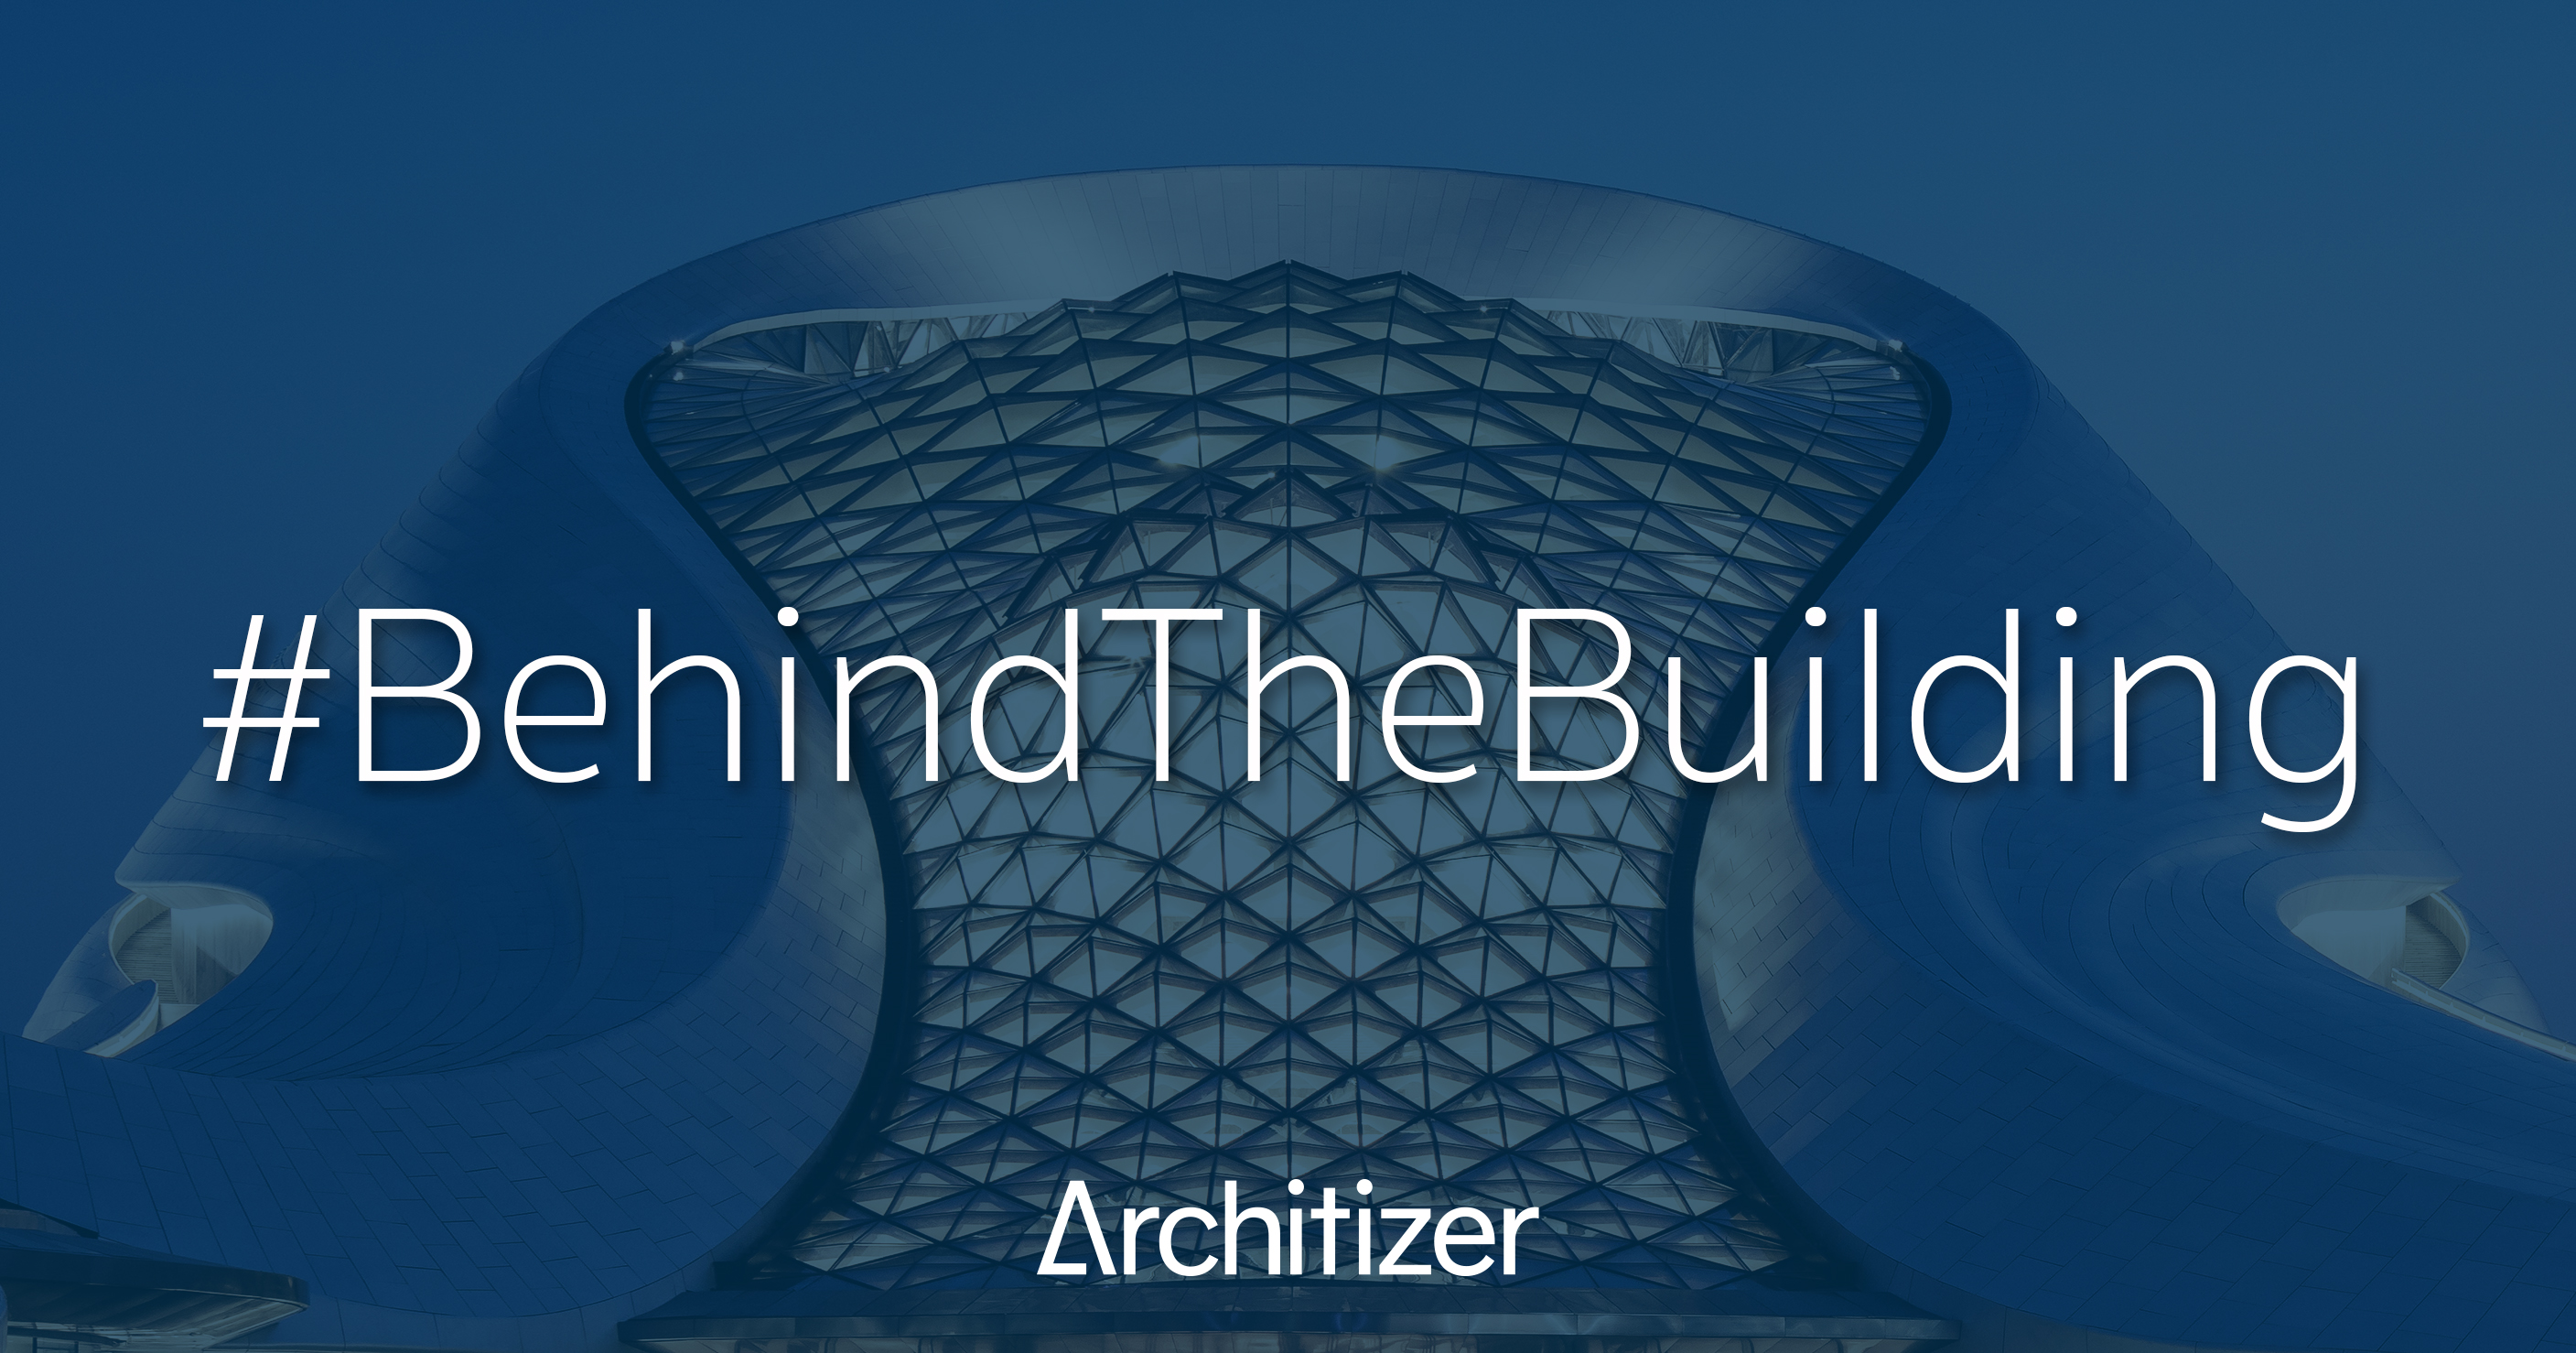 behind the building competition